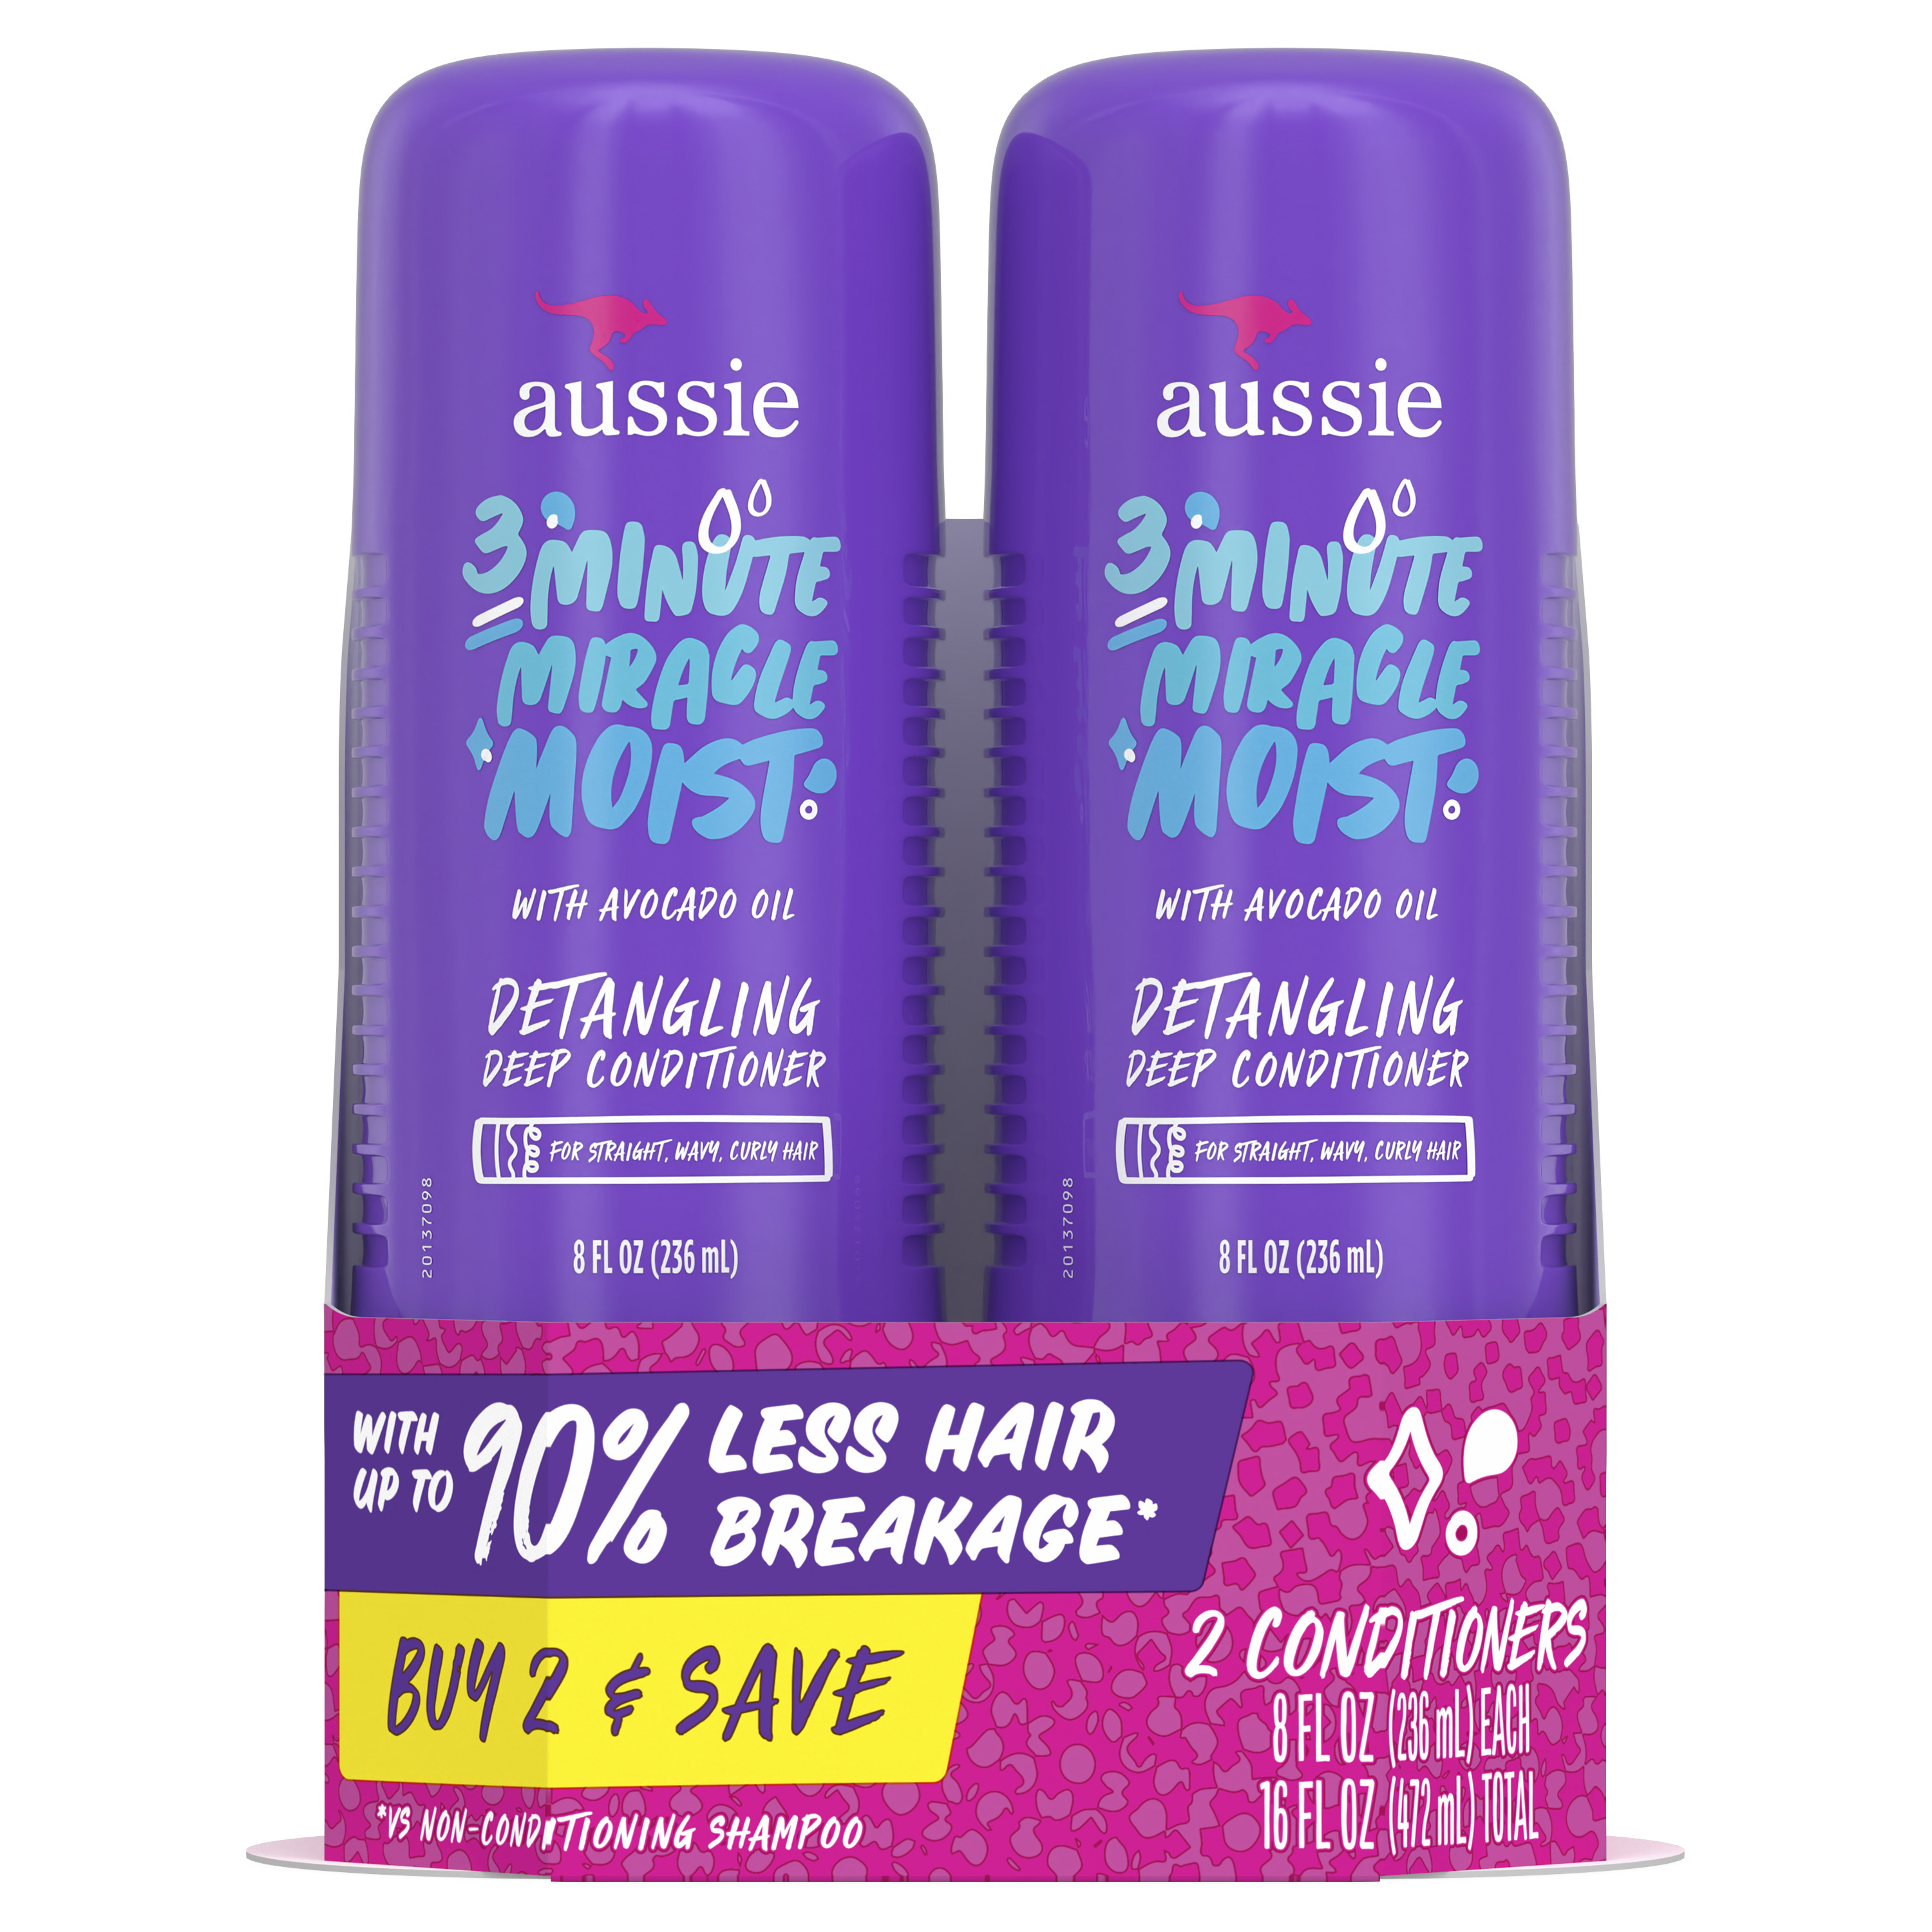 Aussie 3 Minute Miracle Moist Conditioner, Paraben Free, Twin Pk, 8.0 fl oz. for All Hair Types - image 1 of 12